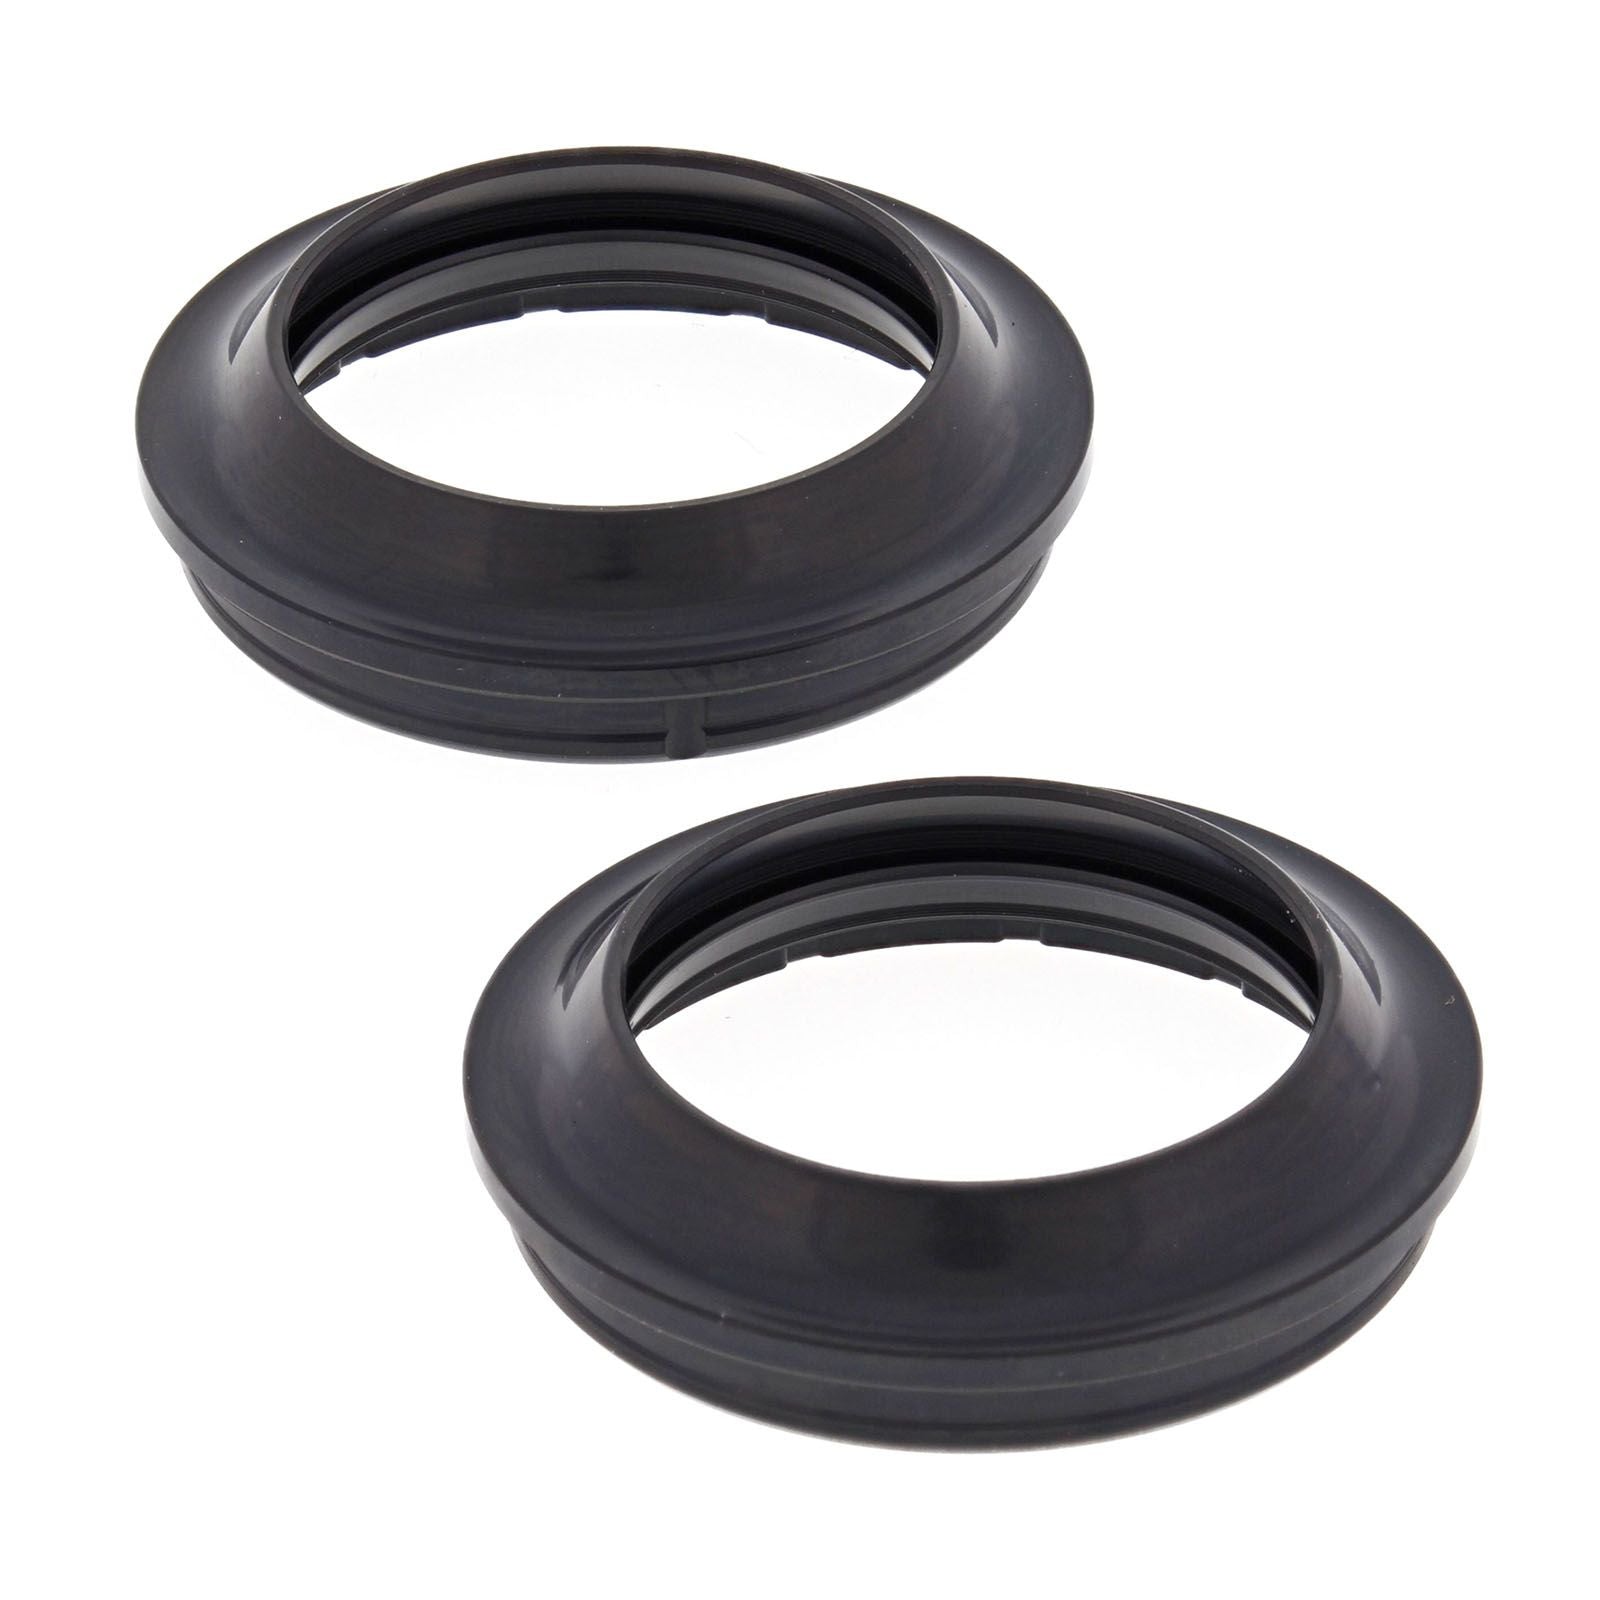 New ALL BALLS Racing Fork Dust Seal Kit #AB57143